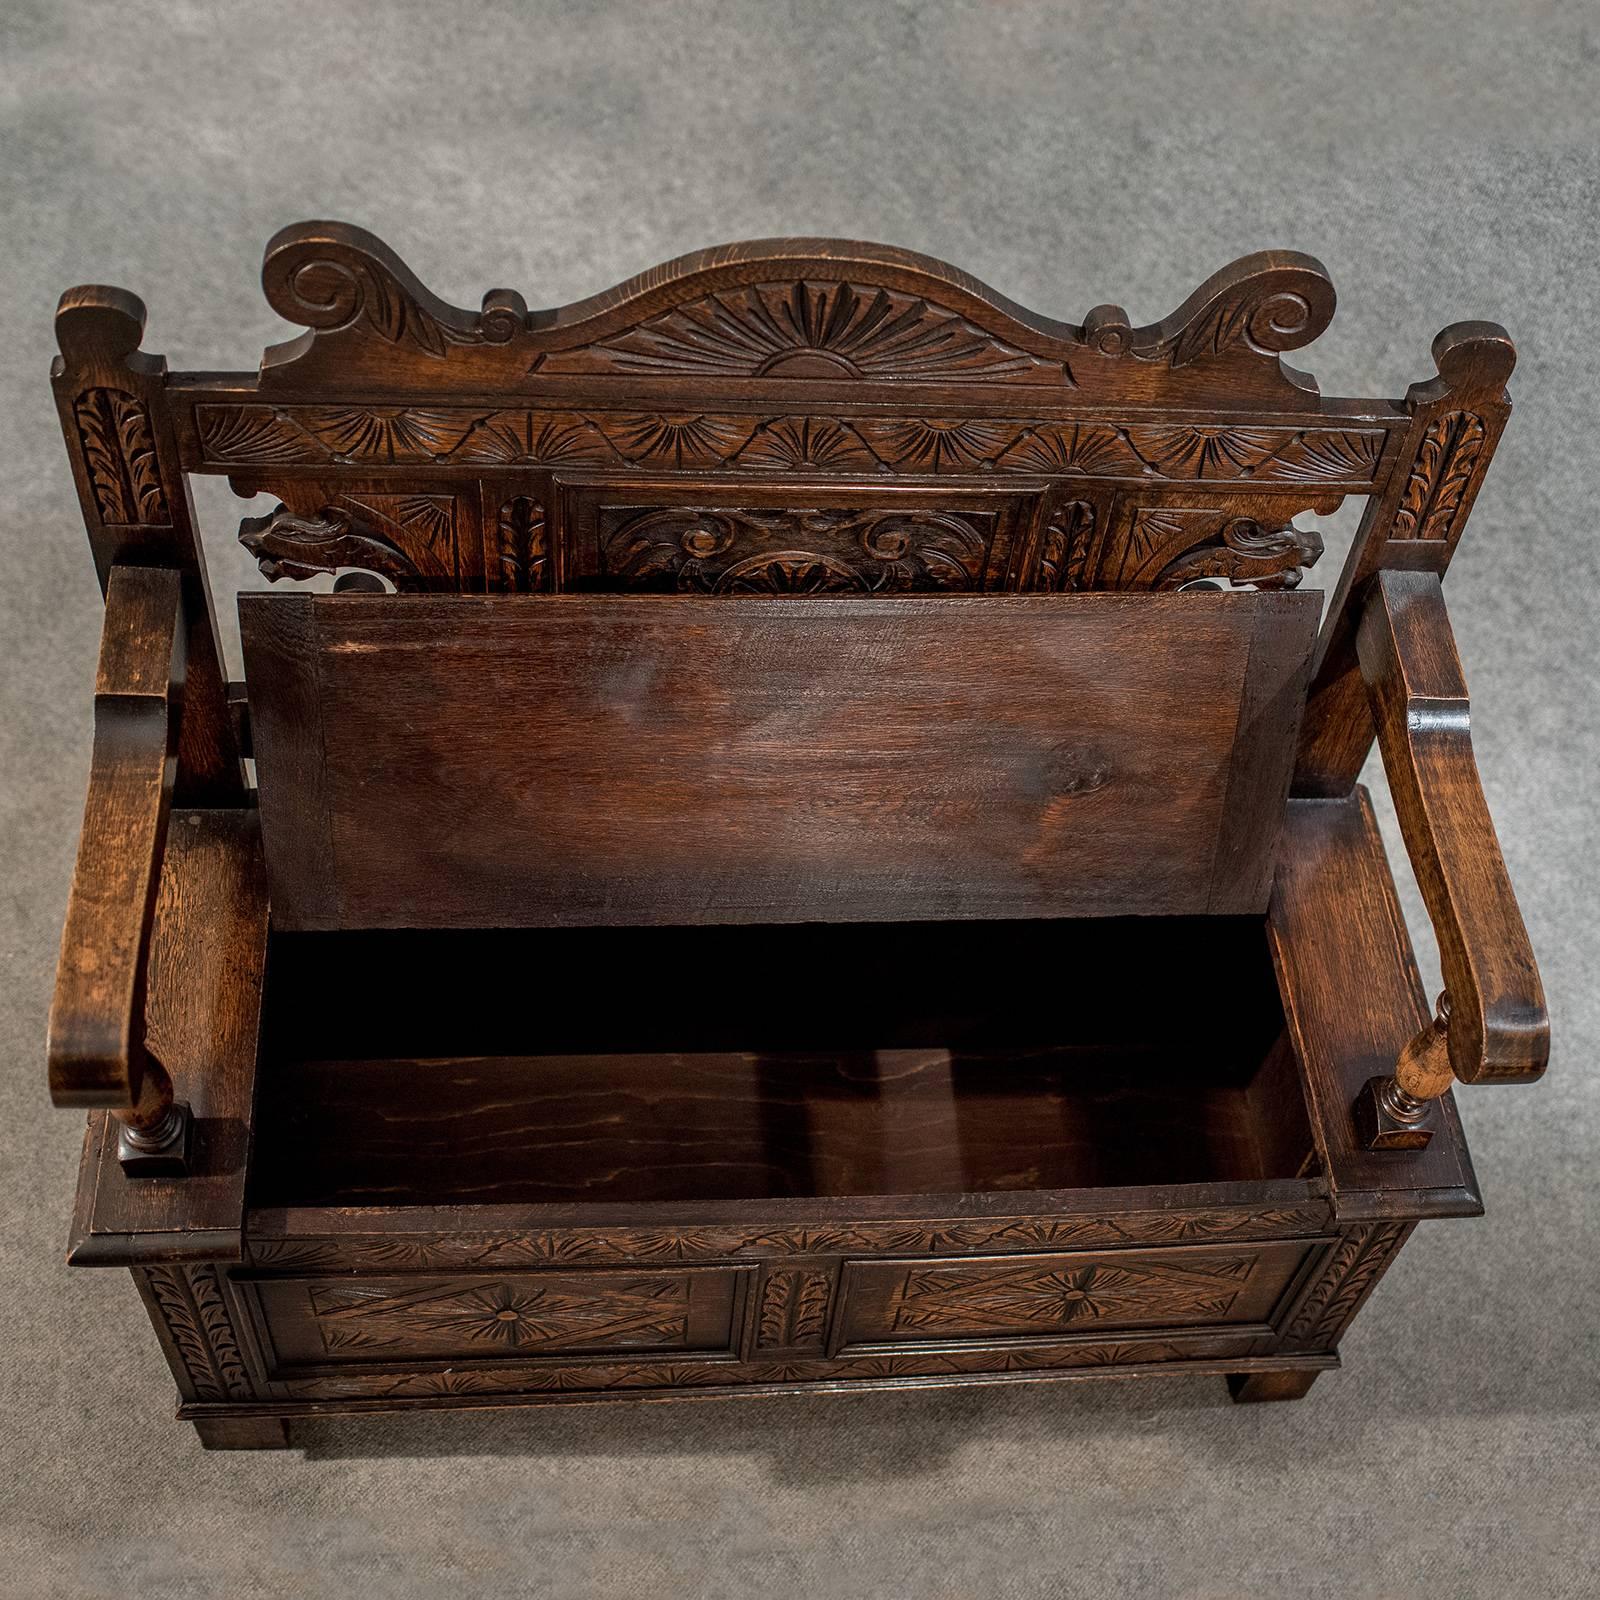 Great Britain (UK) Carved Oak Settle Bench Pew Hall Seat with Locker, English, Mid-20th Century